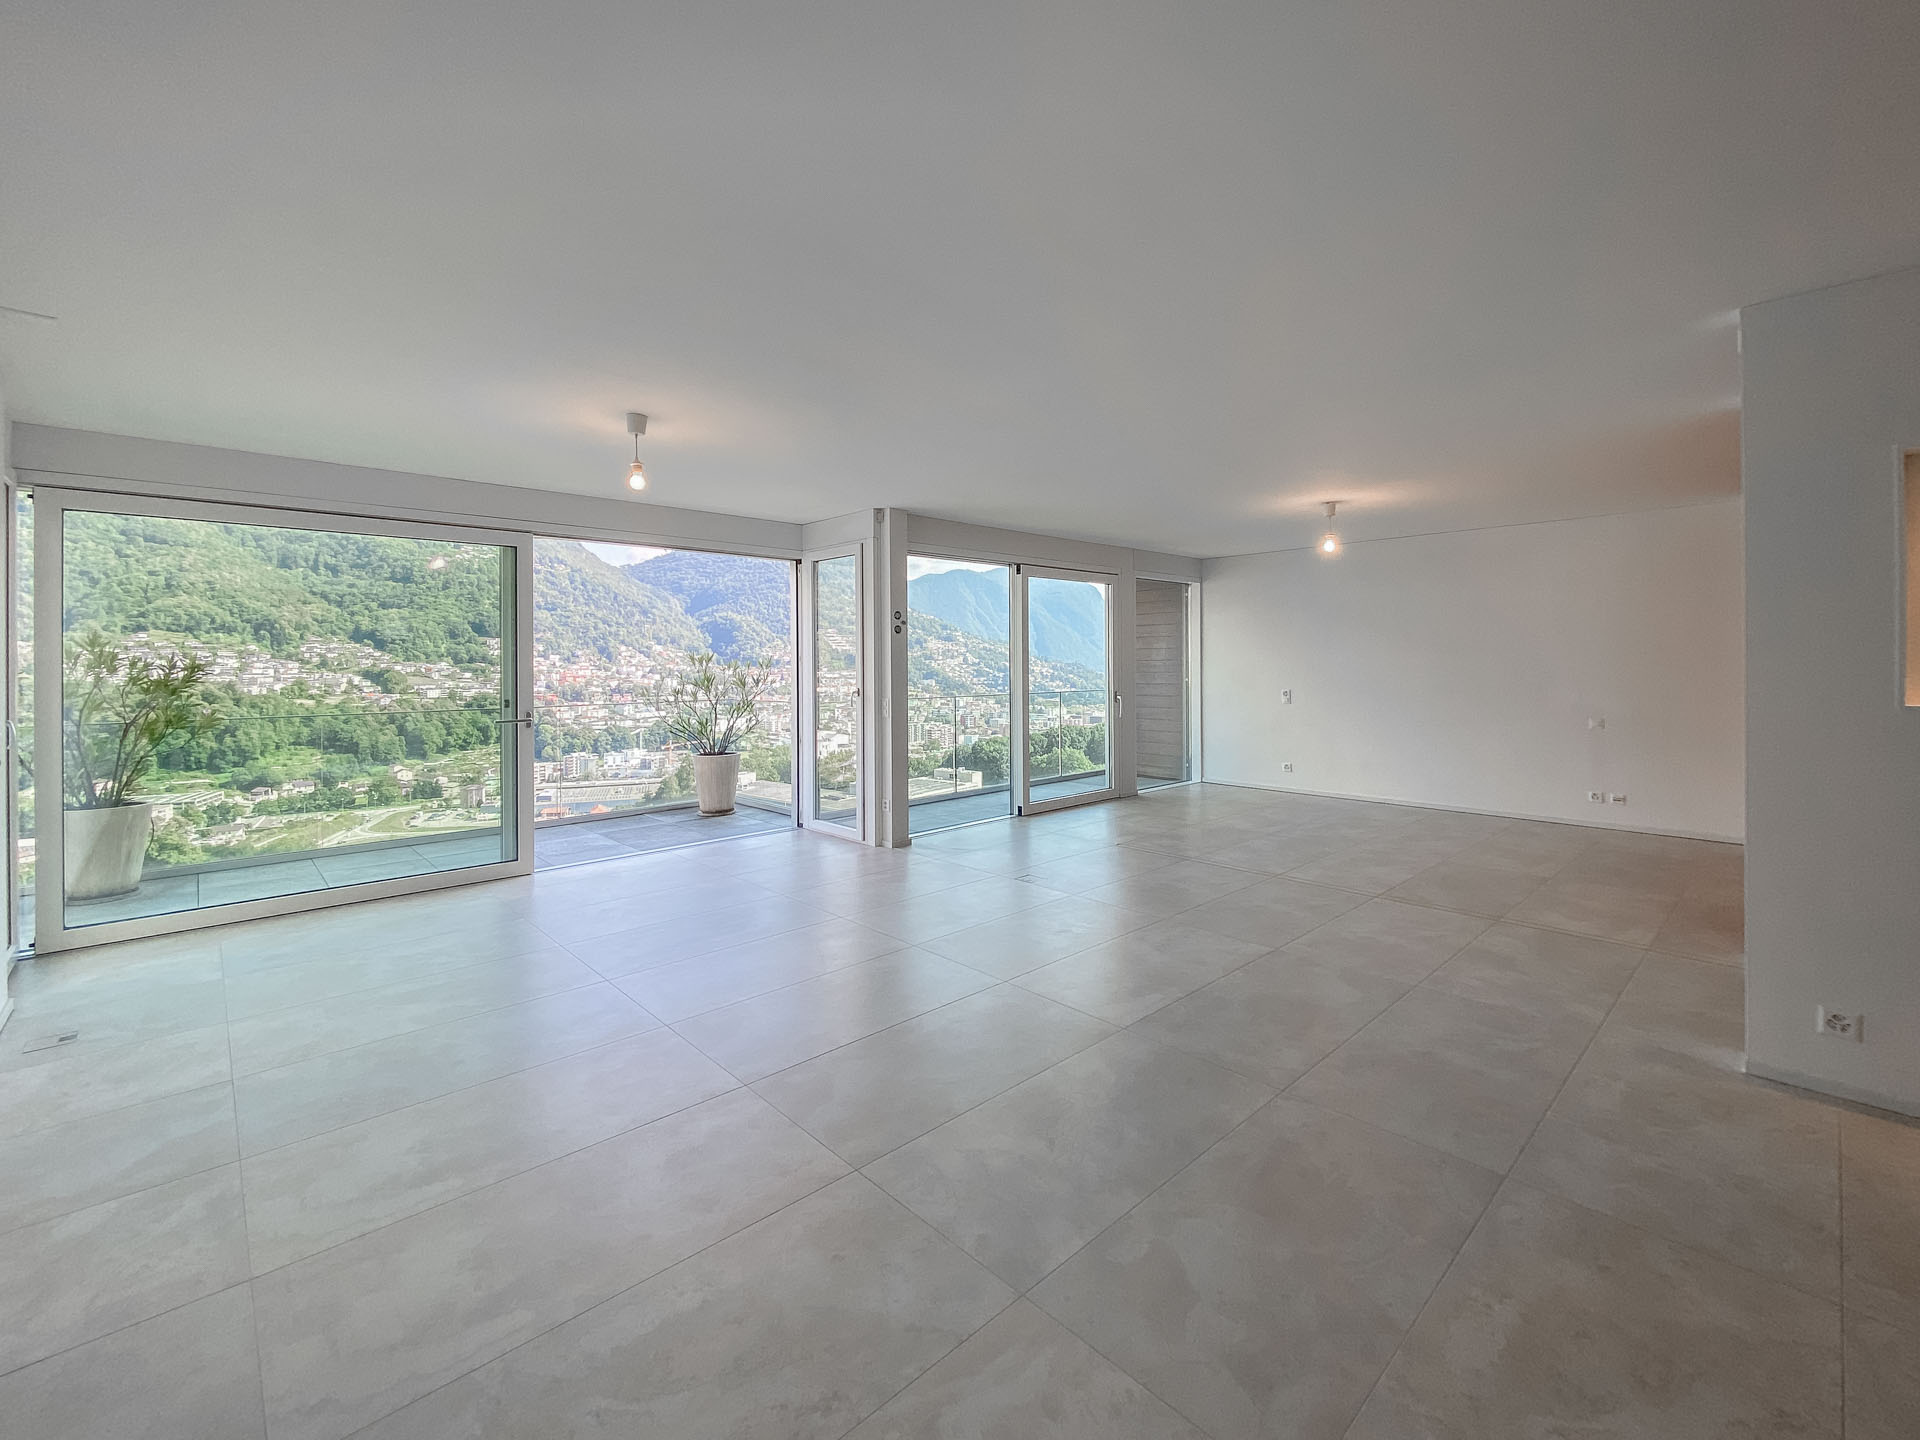 Modern and refined apartment overlooking the lake for sale in Canobbio